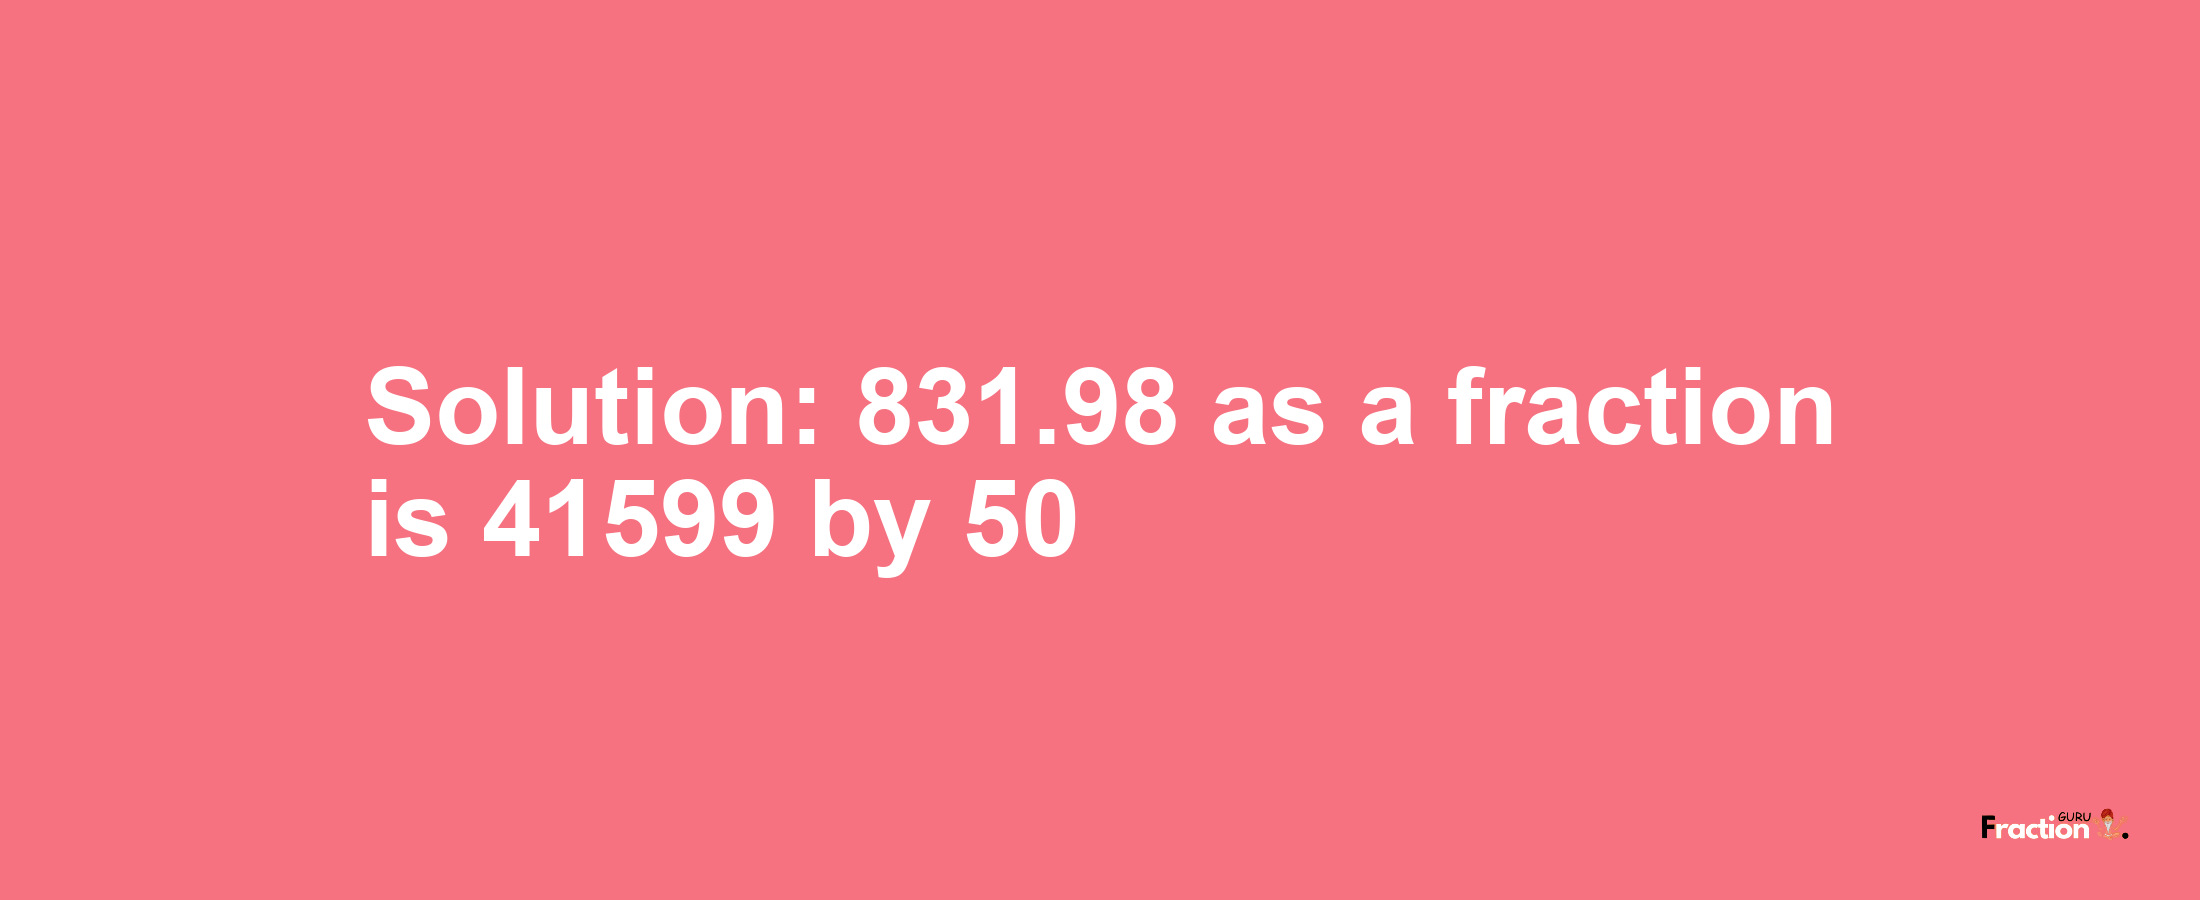 Solution:831.98 as a fraction is 41599/50